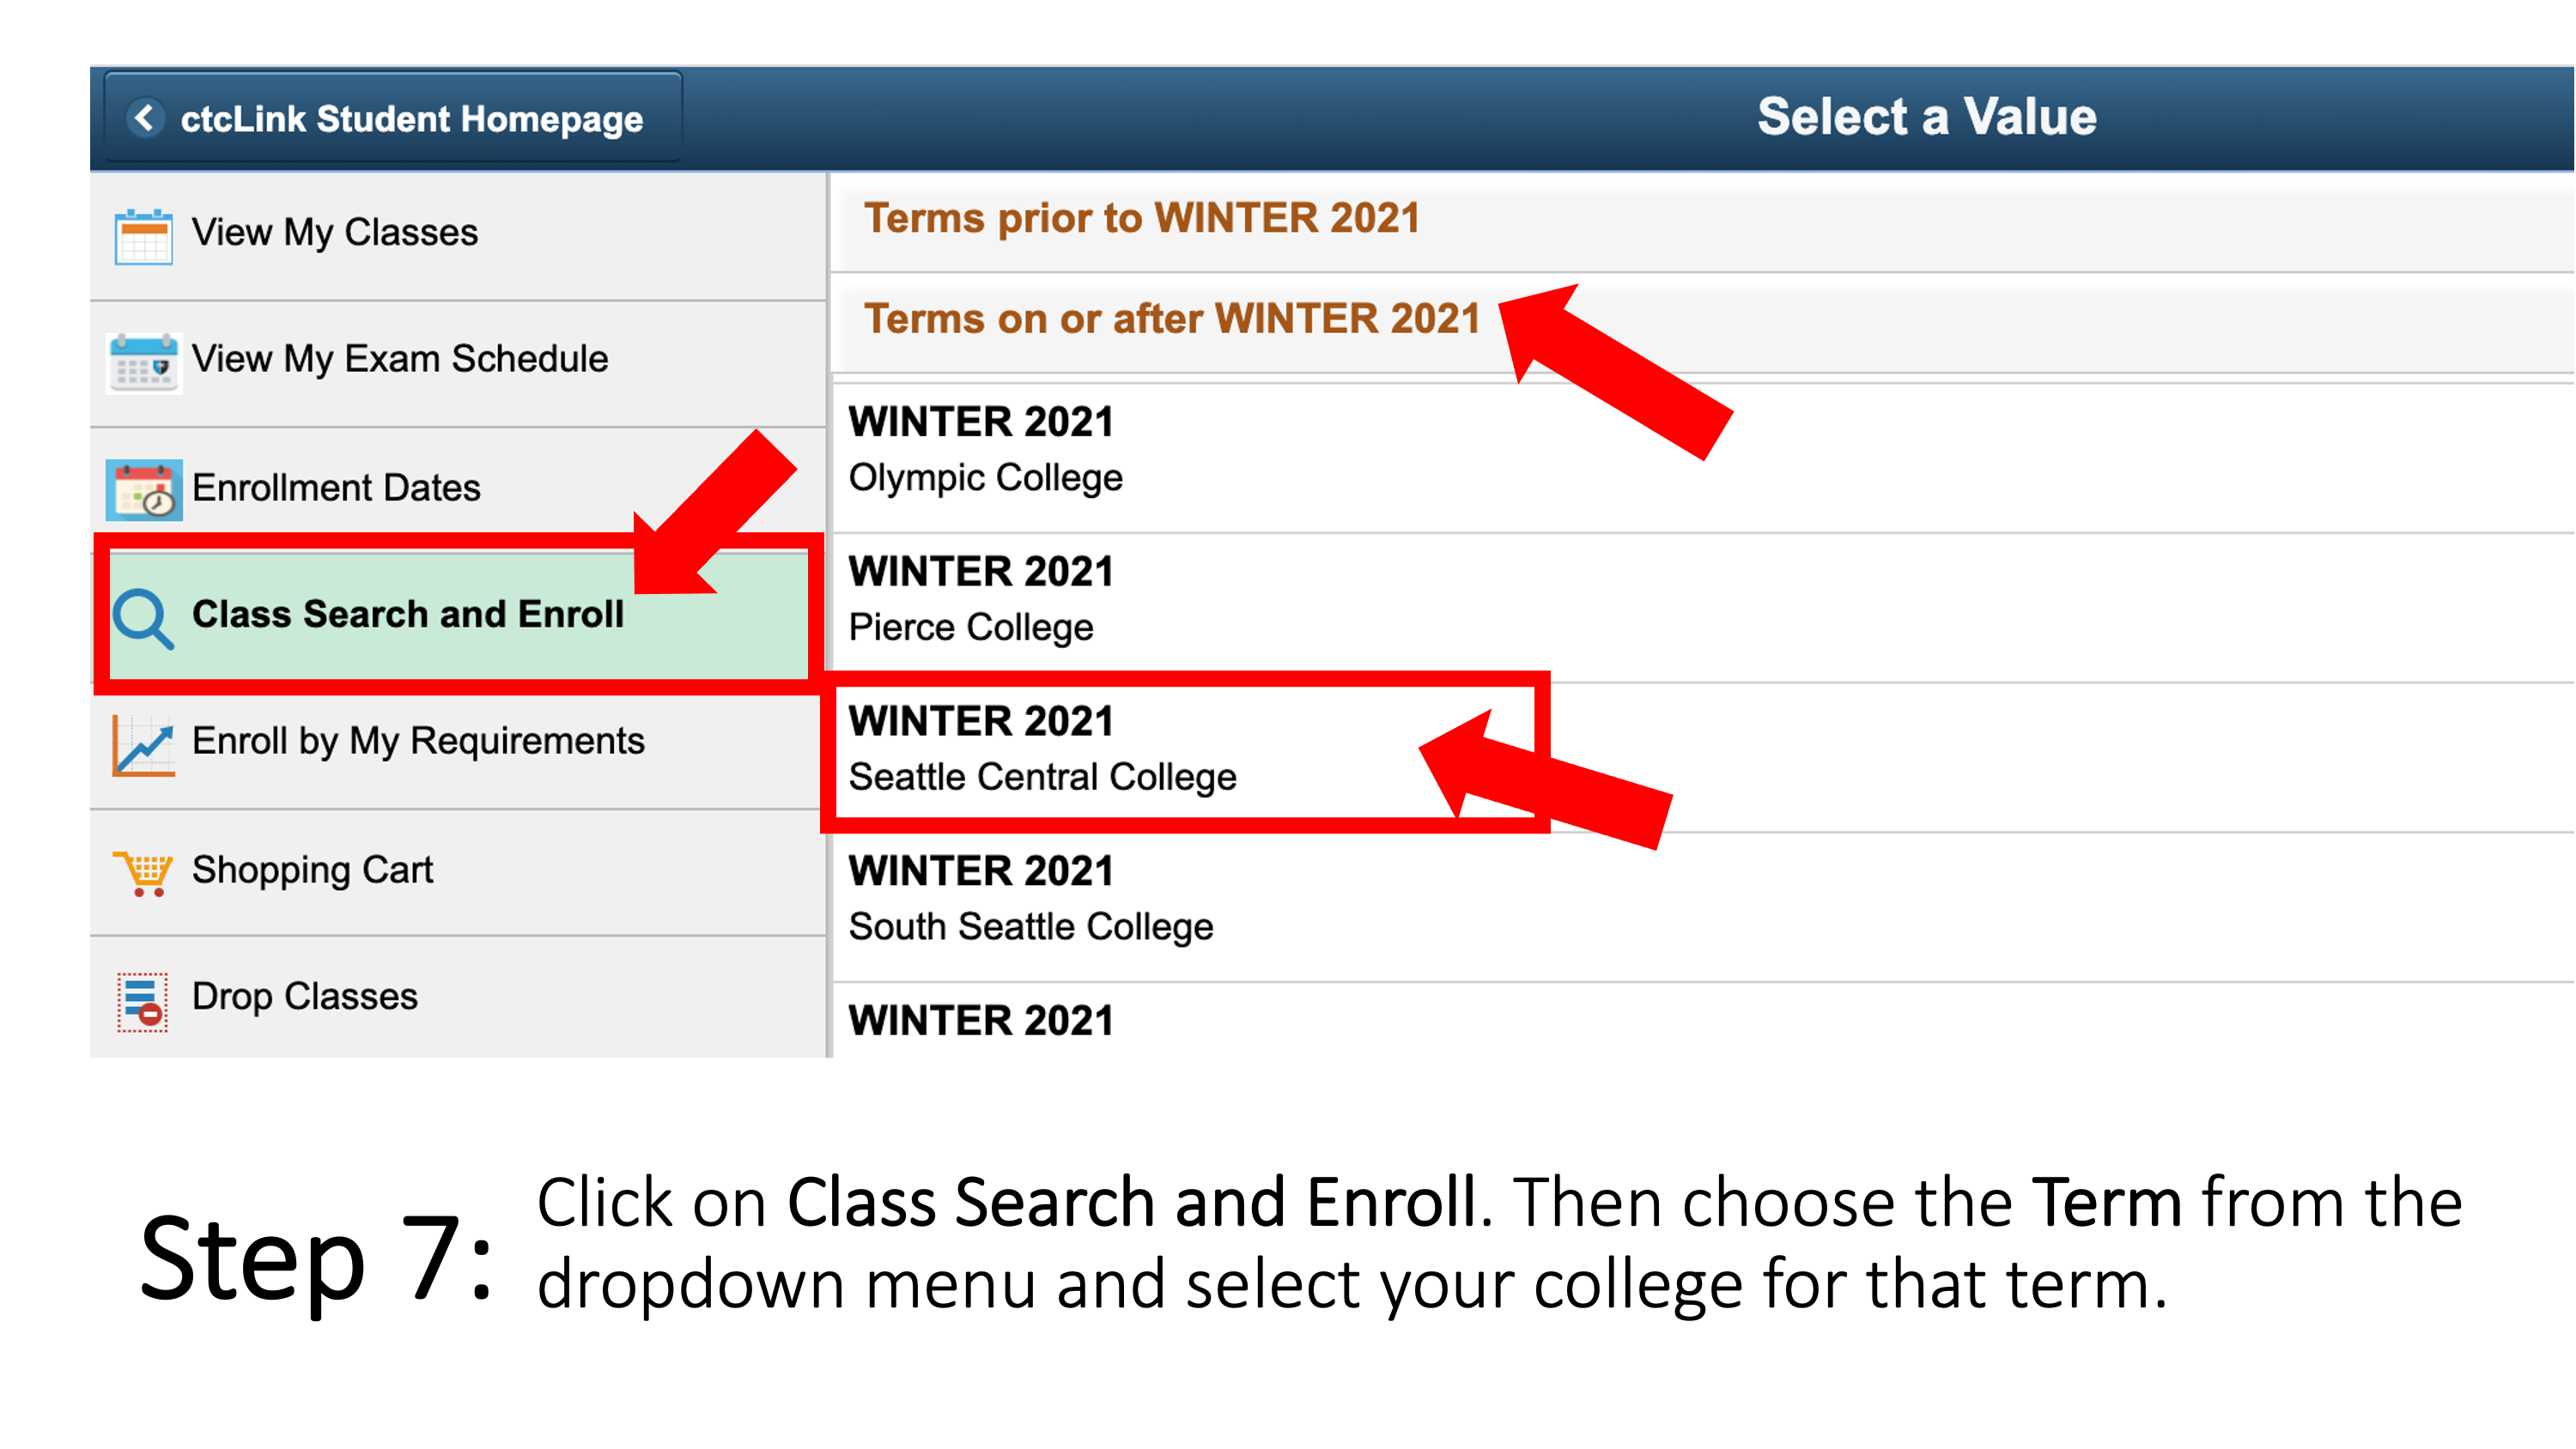 Click on Class Search and Enroll. Then choose the Term from the dropdown menu and select your college for that term.